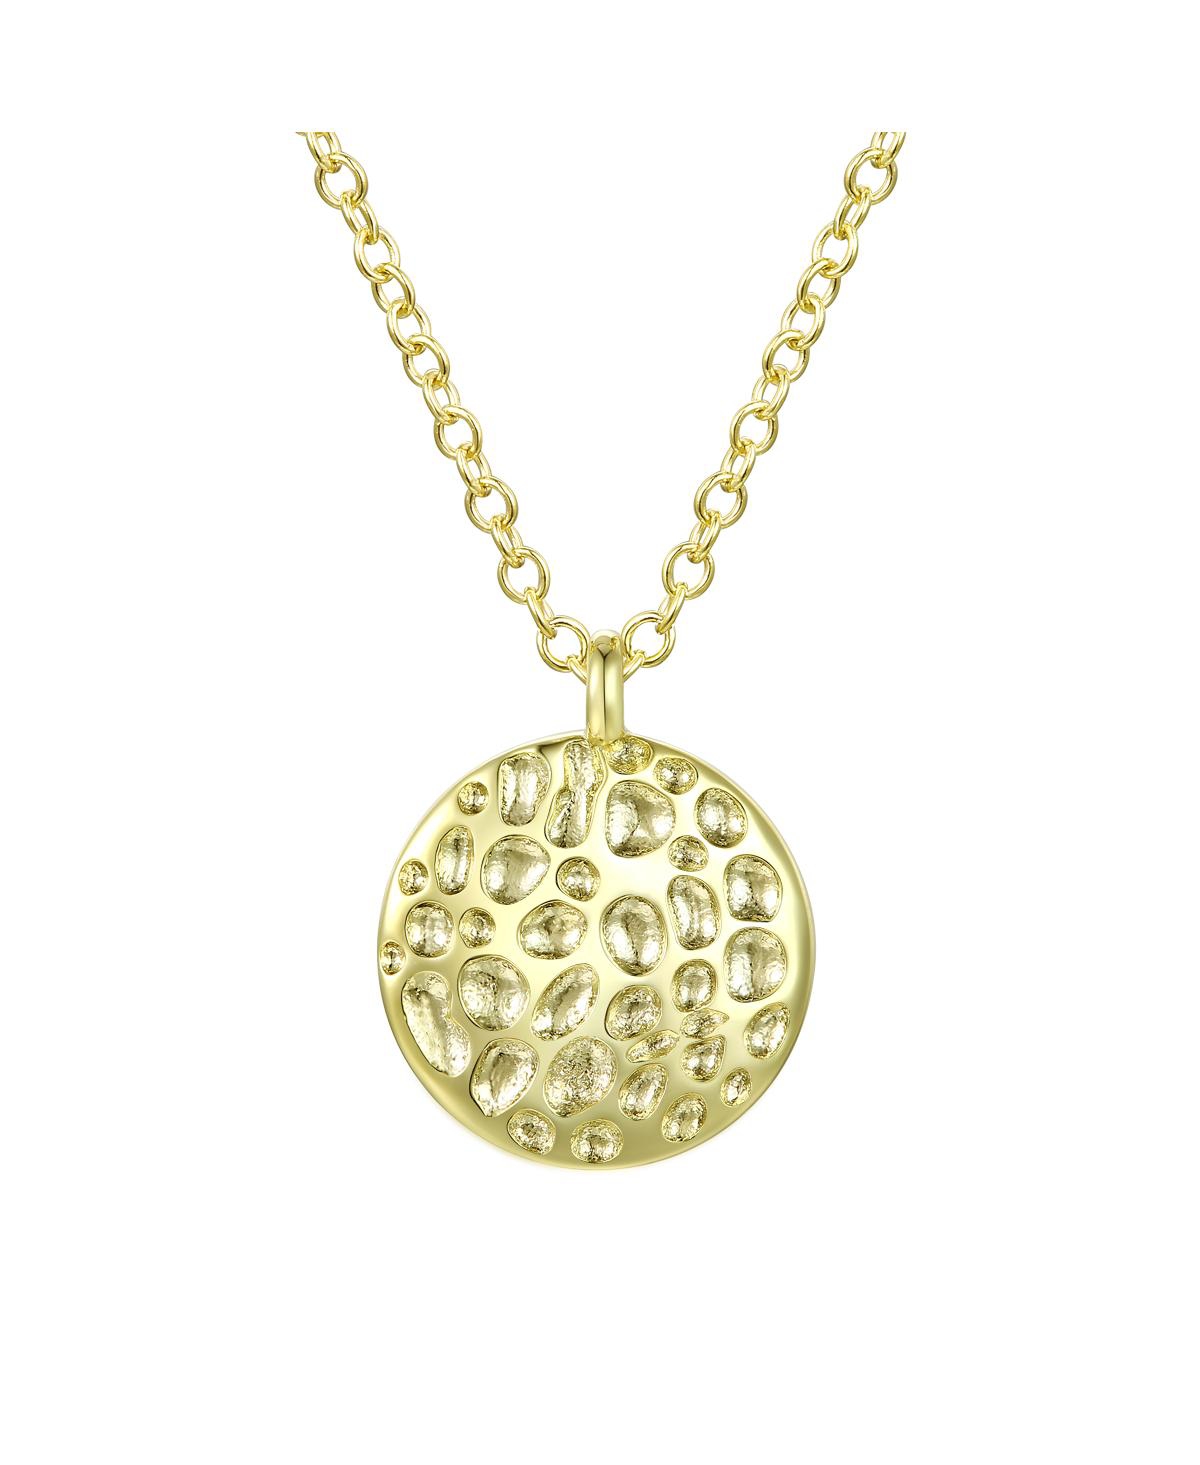 RACHEL GLAUBER CLASSIC 14K GOLD PLATED ROUND SHAPED ENGRAVED PENDANT NECKLACE